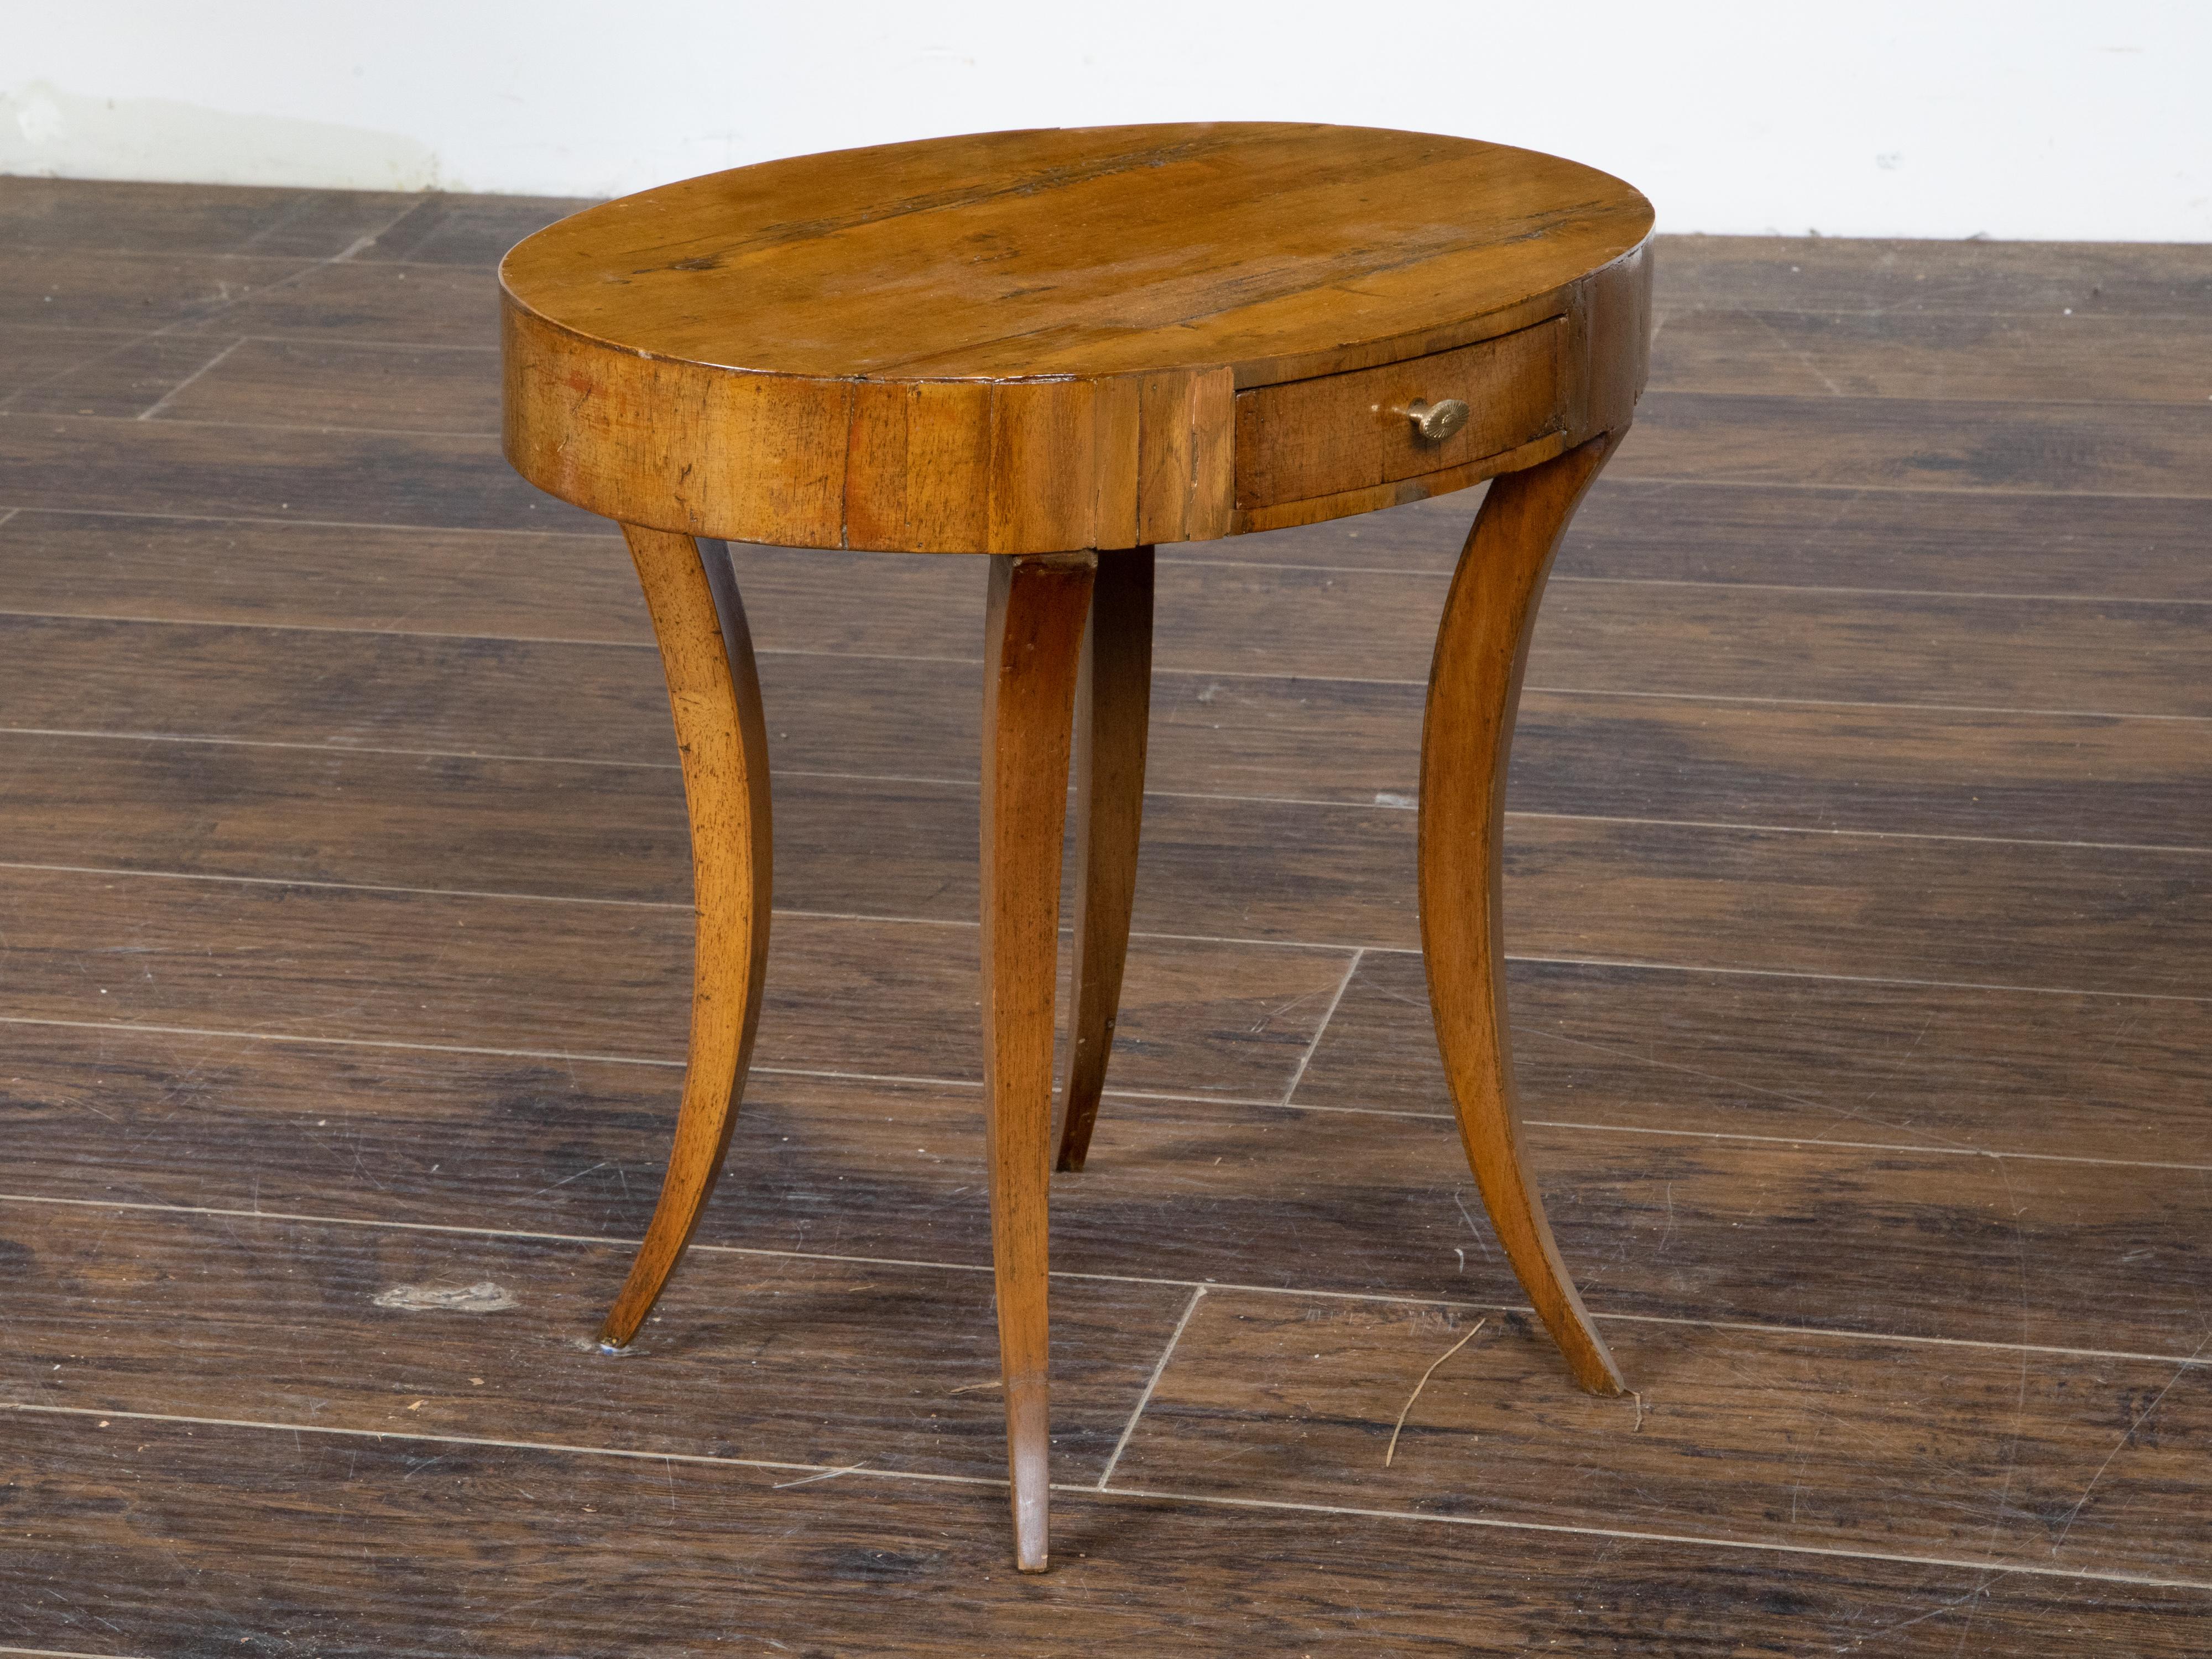 Brass Italian Neoclassical 1810s Walnut Table with Oval Top, Drawer and Saber Legs For Sale